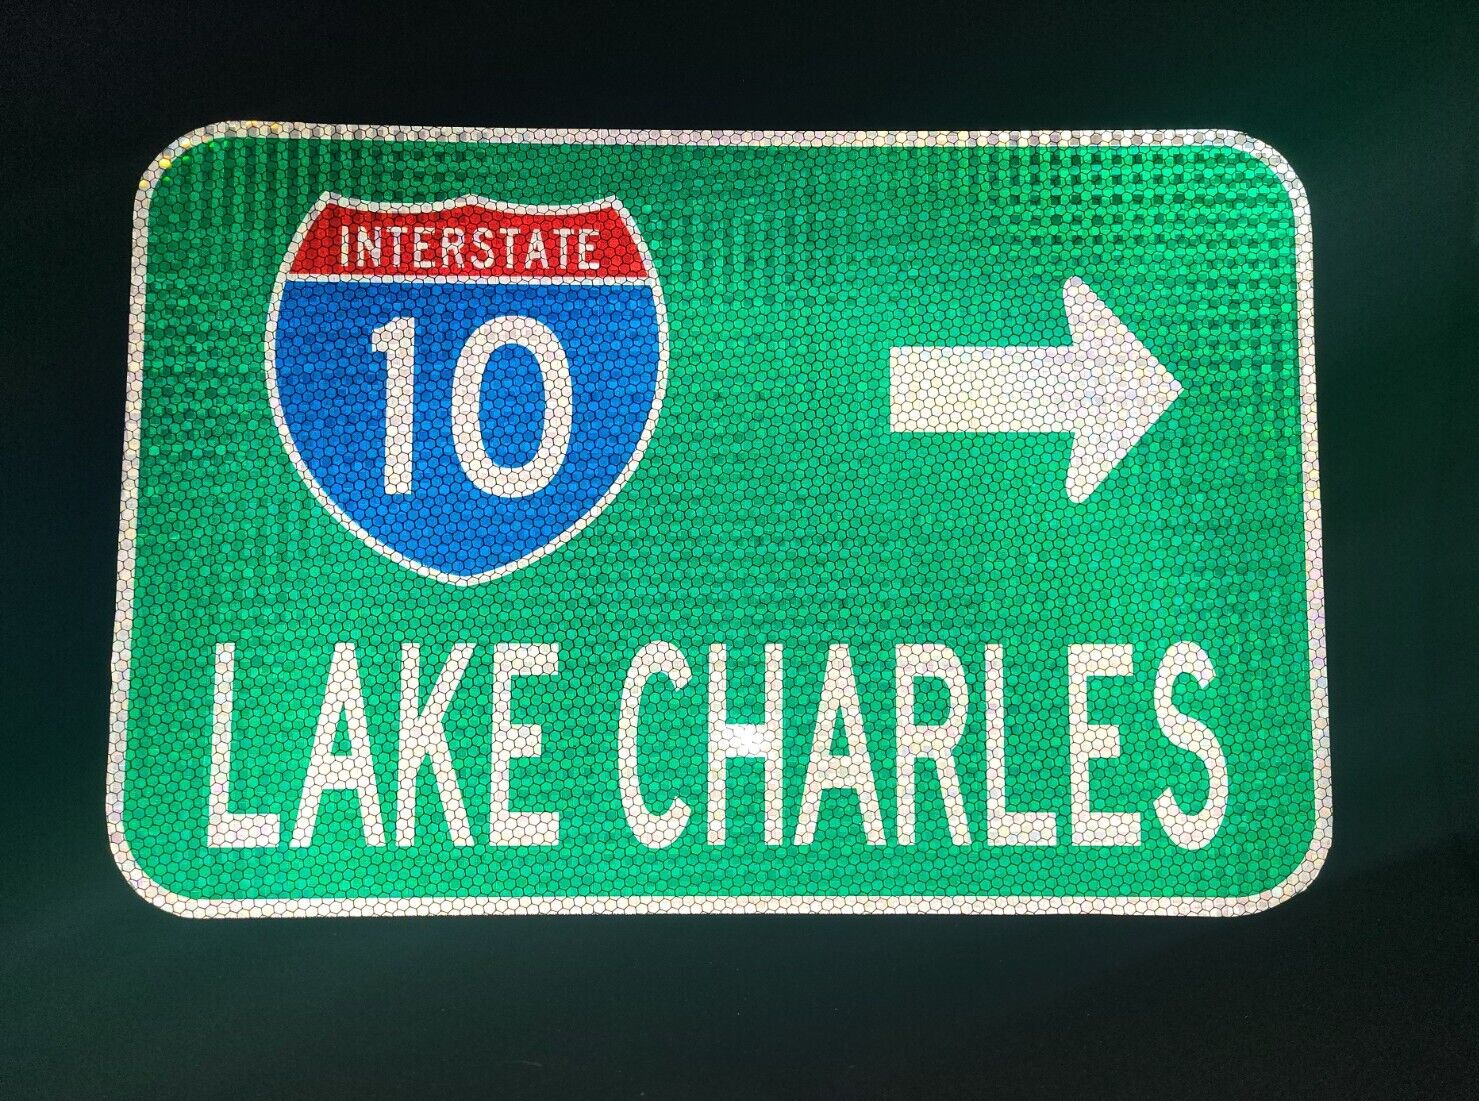 LAKE CHARLES Interstate 10 route road sign - Louisiana, New Orleans, Lafayette